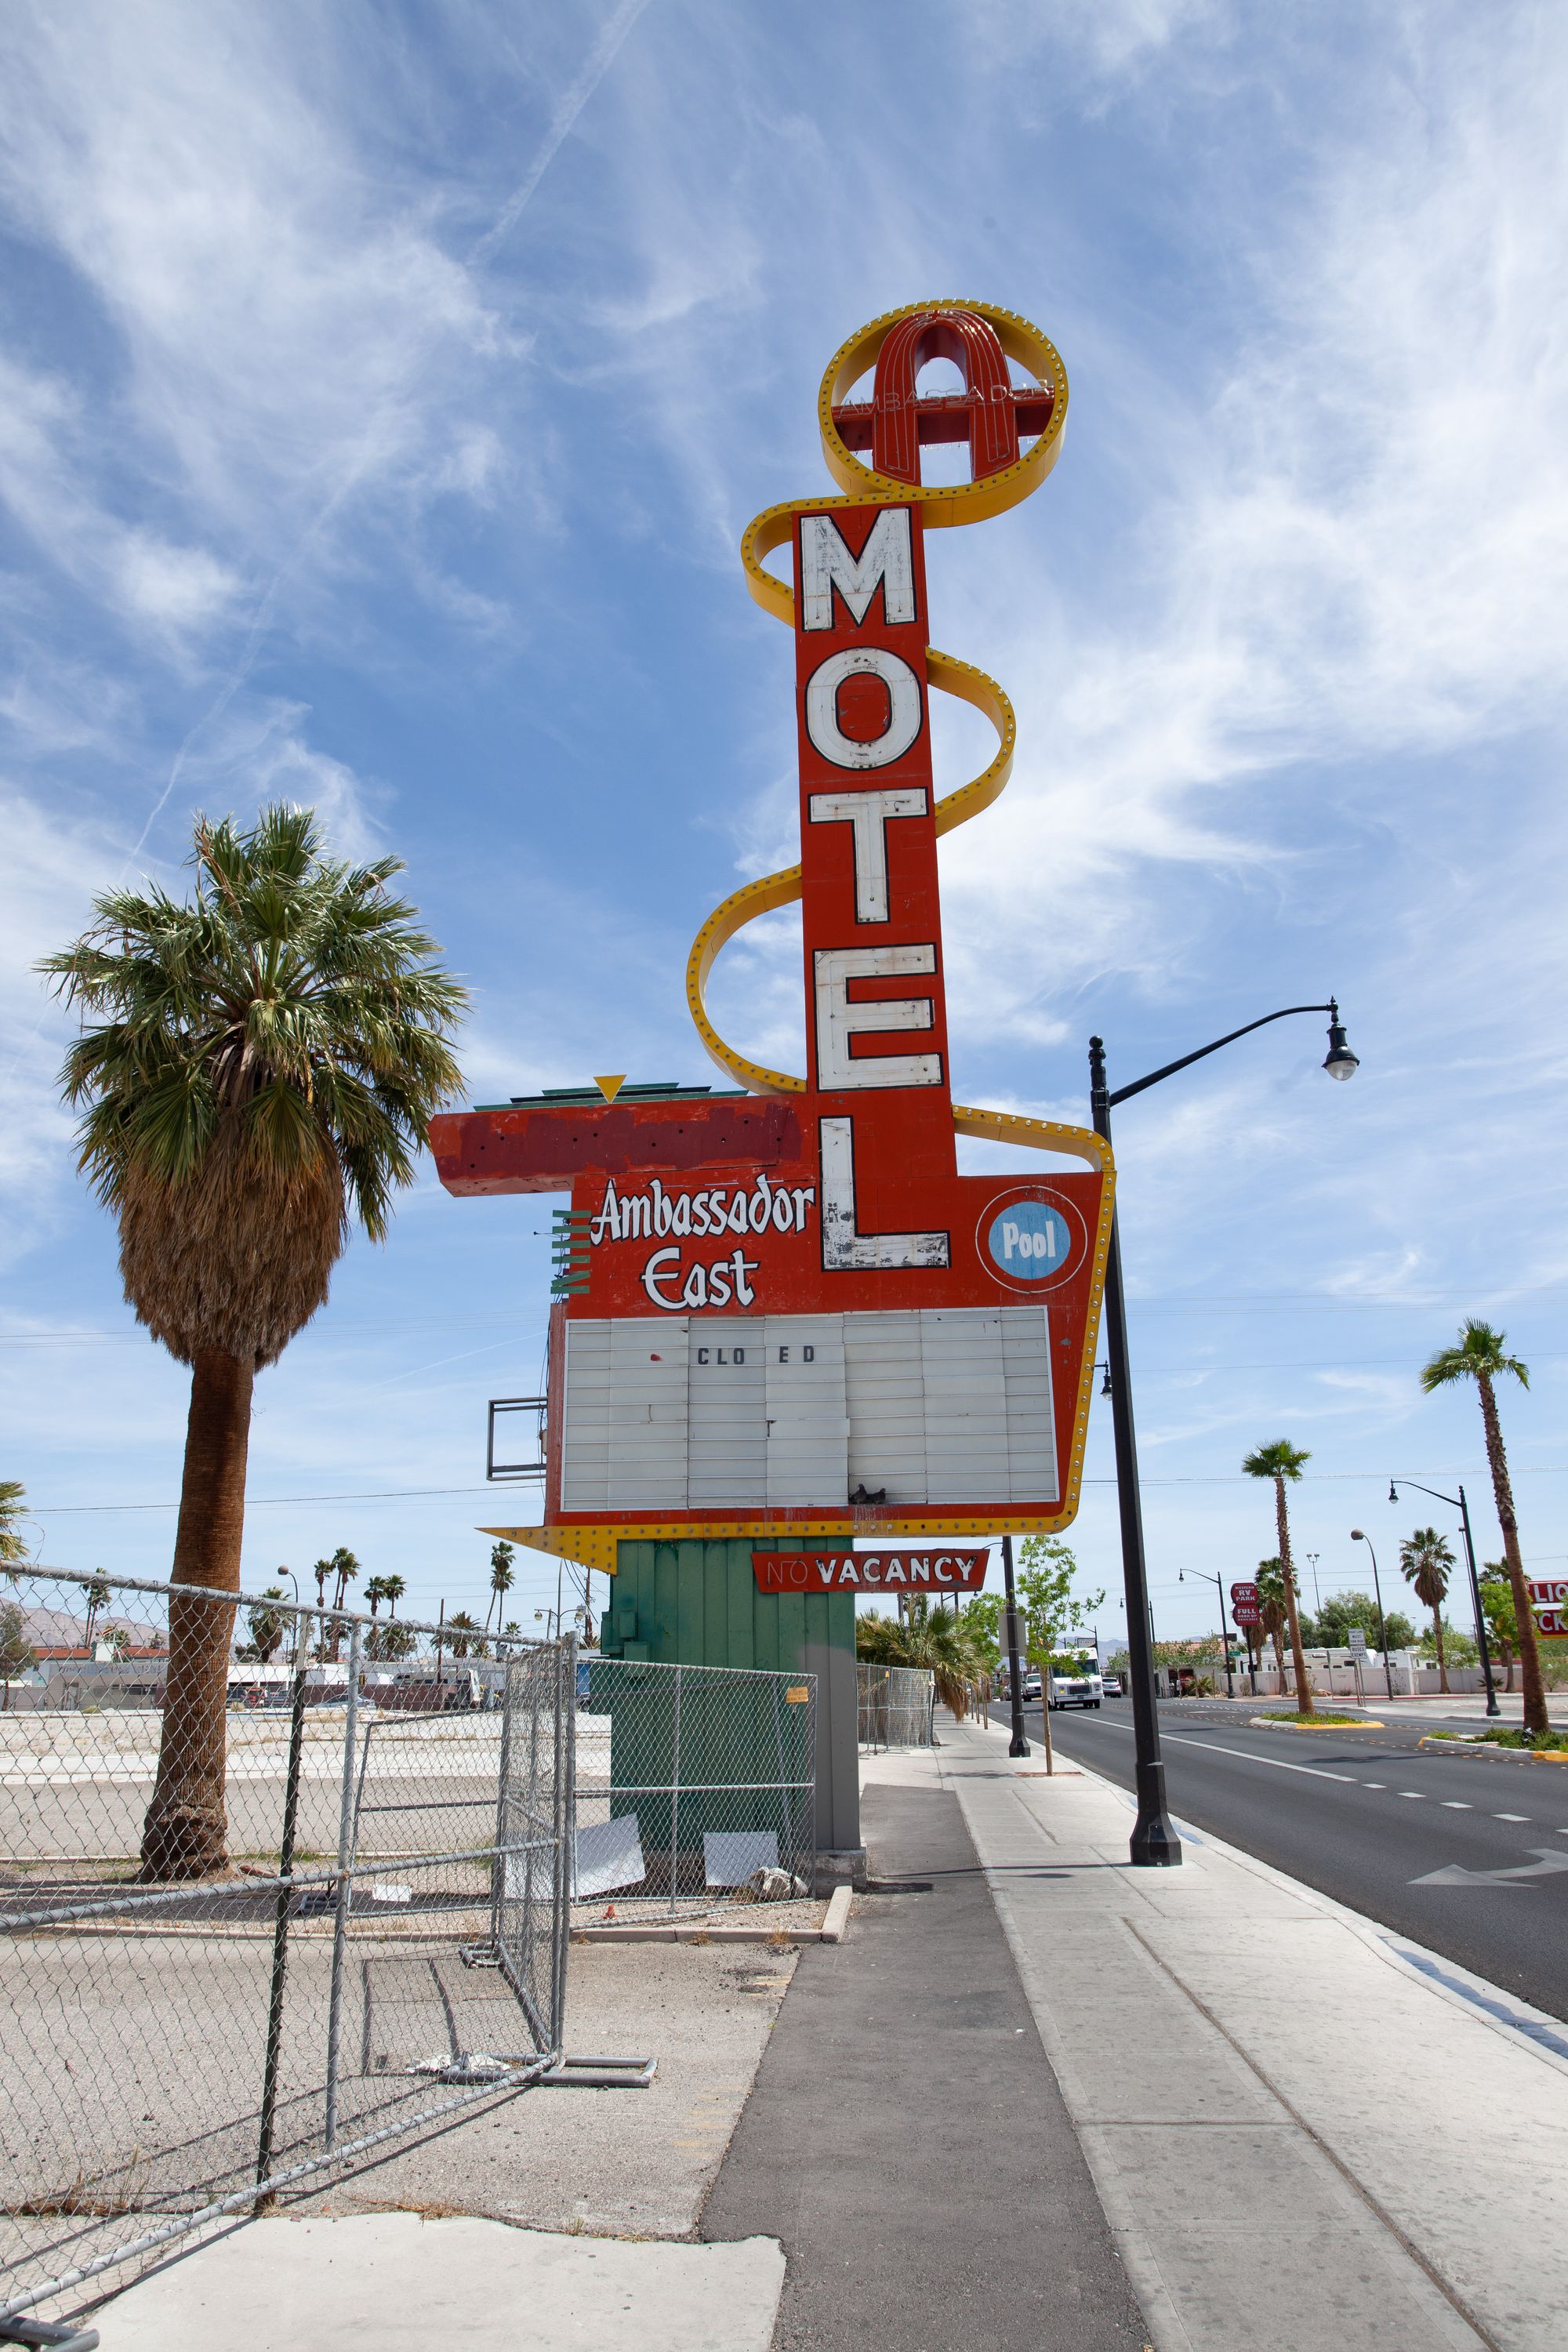 Looking Back at the Vegas Vernacular Project